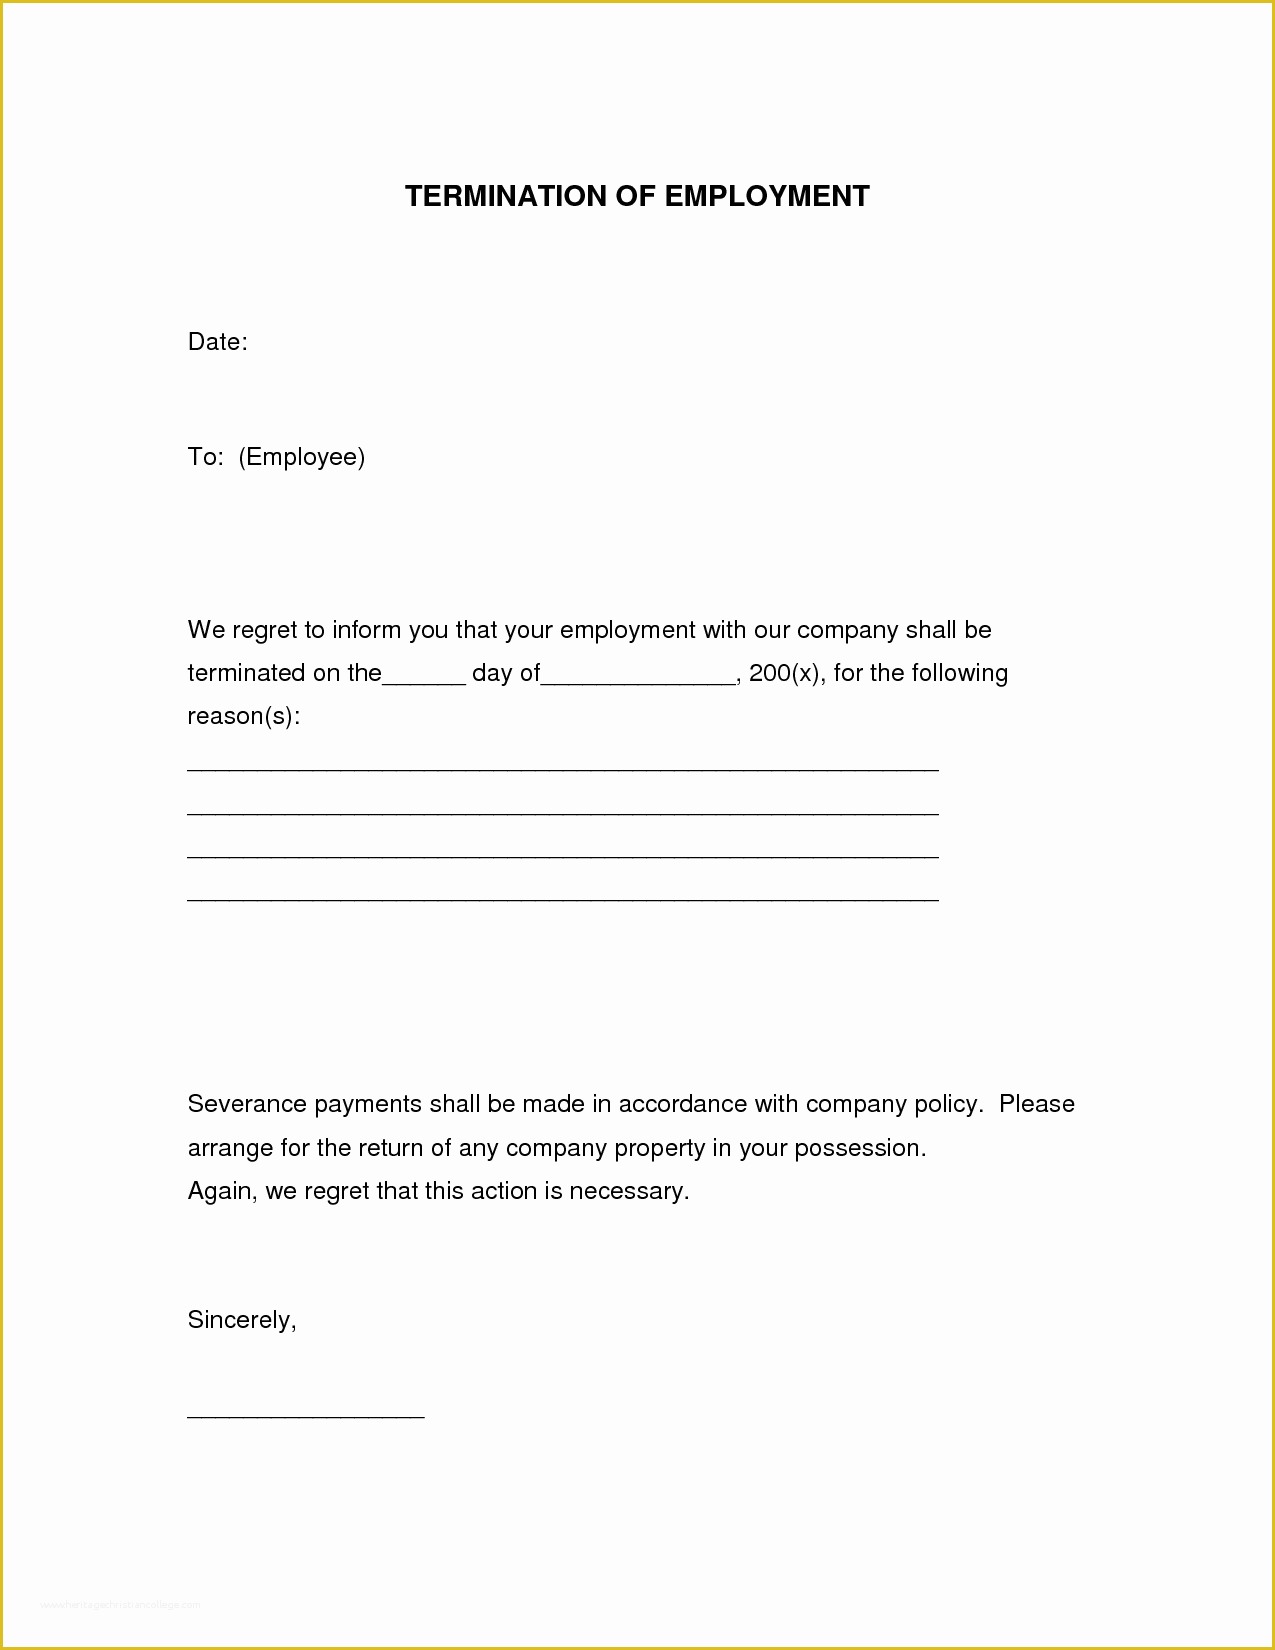 Termination form Template Free Of Employee Separation form Template Portablegasgrillweber